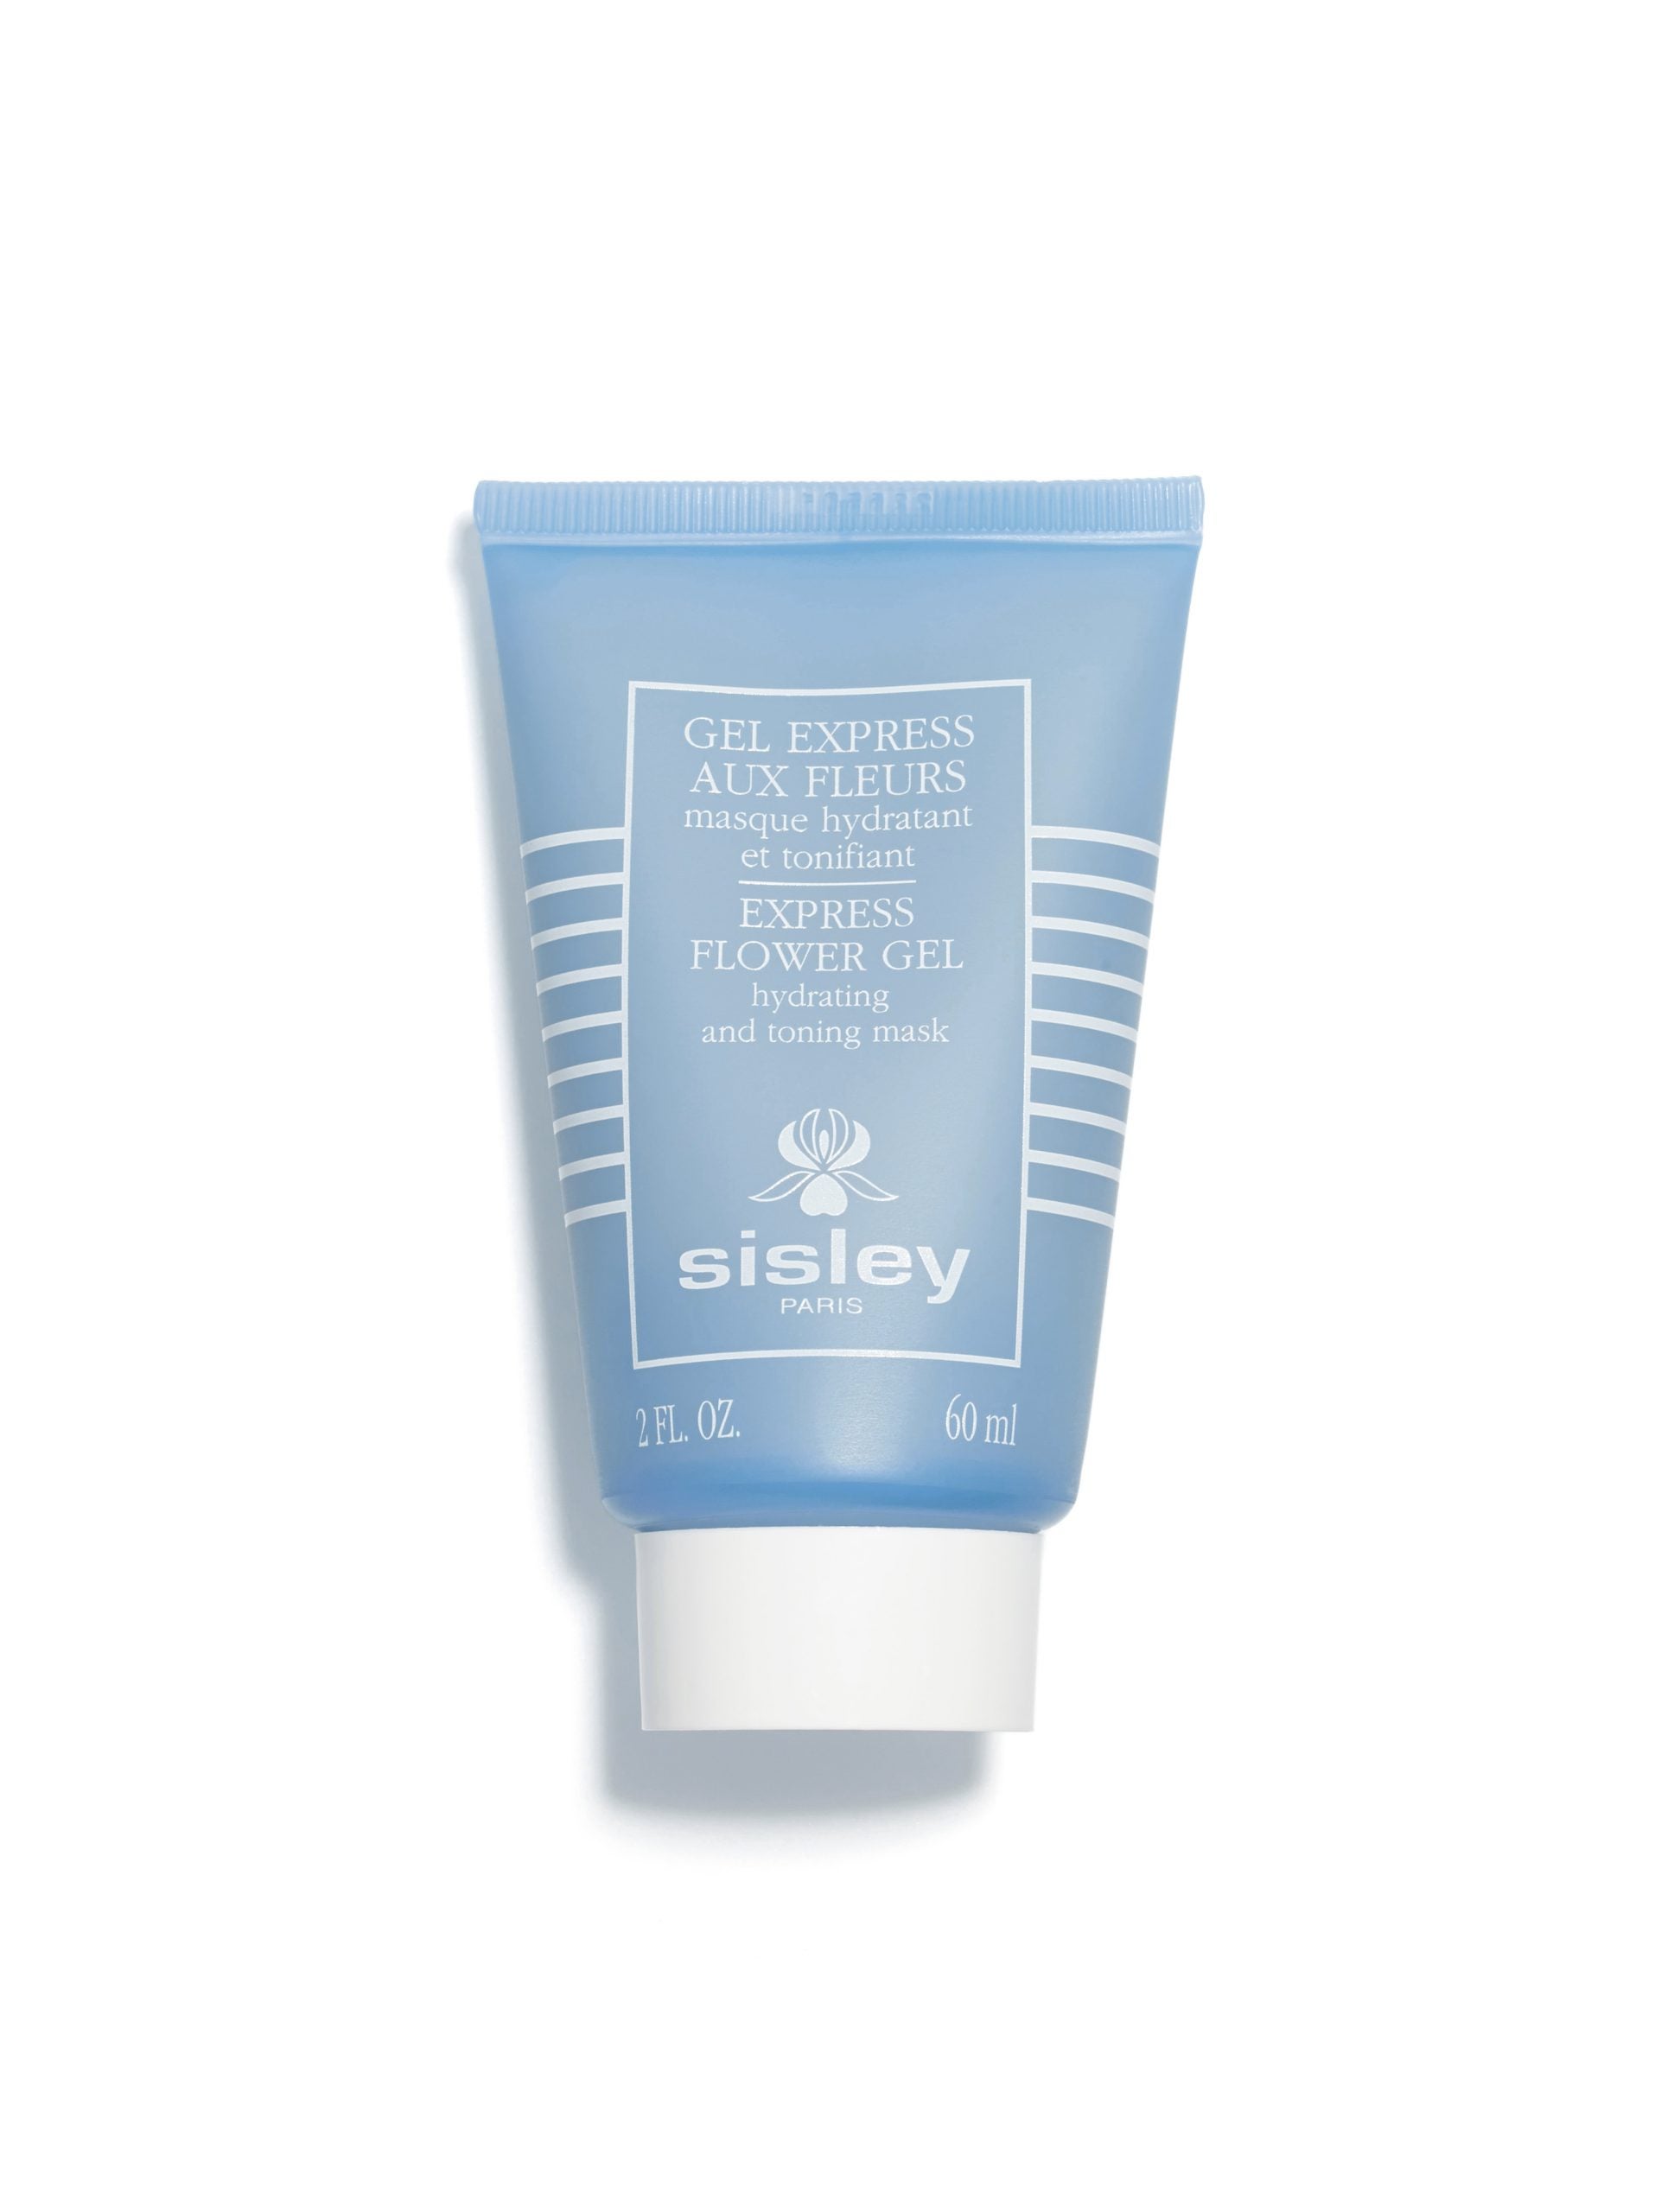 These Sisley Paris Face Masks Promote Healthy Skin And Smell Amazing